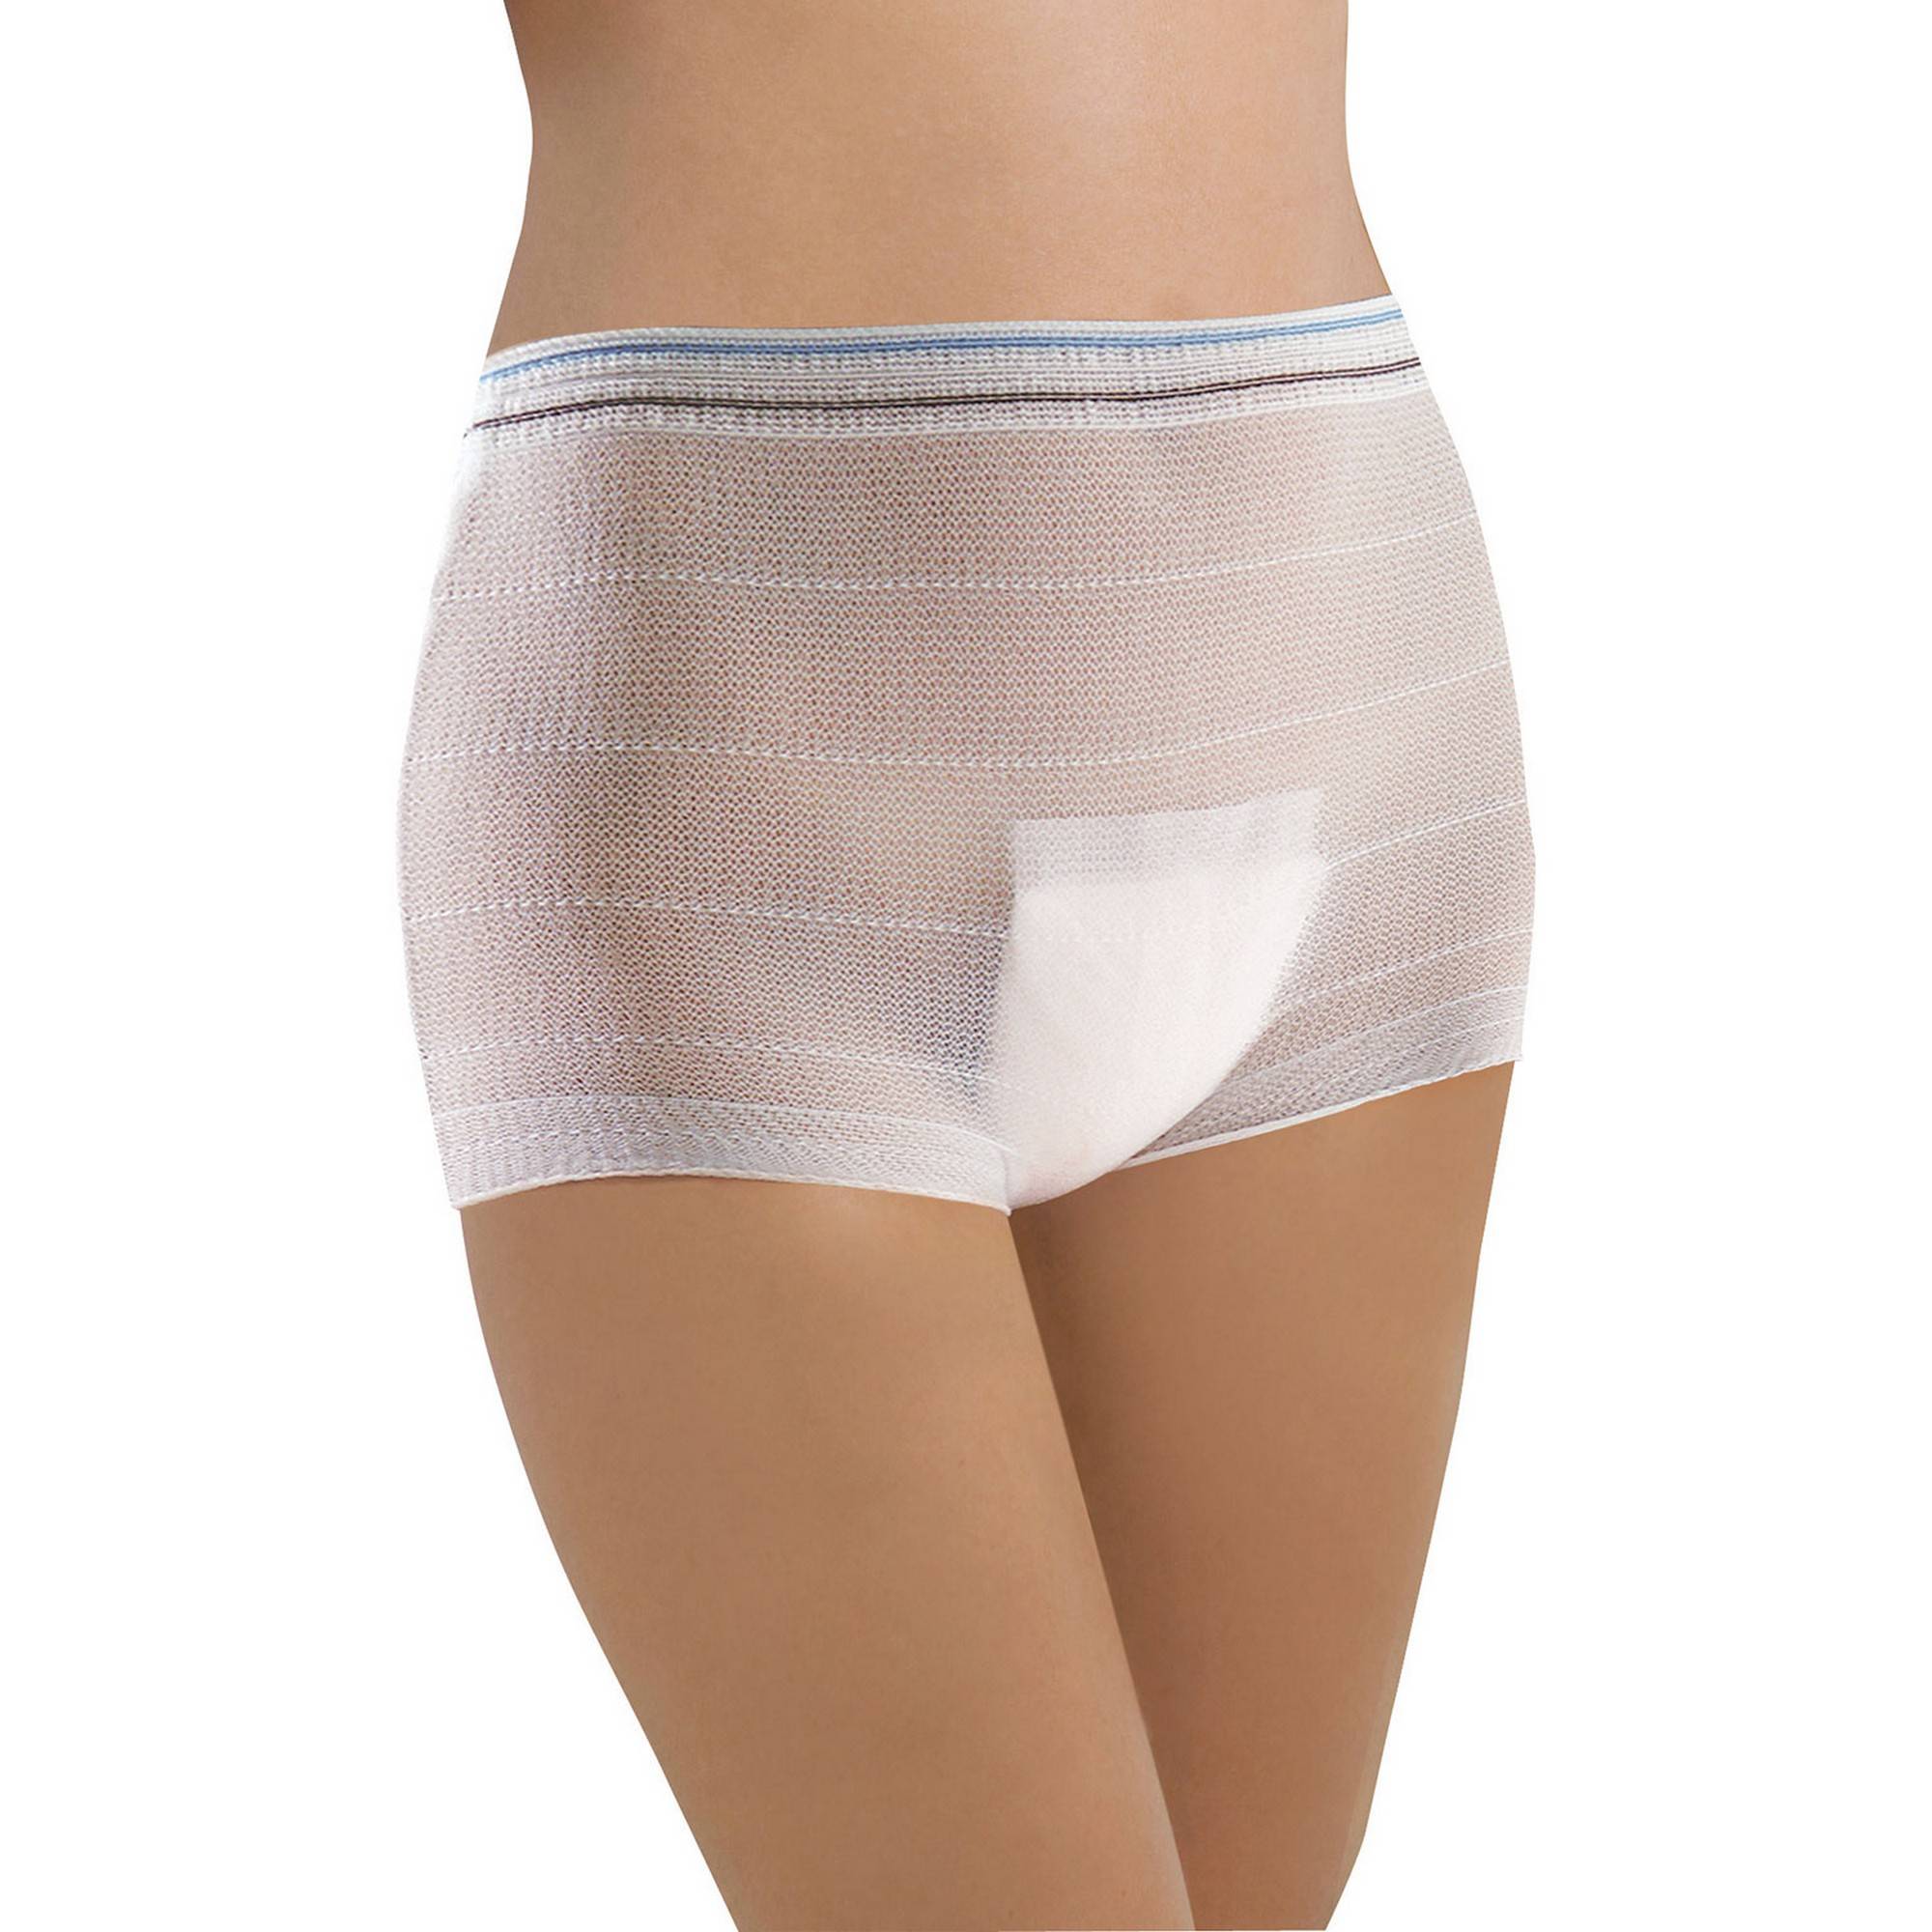 Large Adjustable Cute Panties, 4PCS Women High Waist Underwere, Hospital  Woman For Maternity Home 